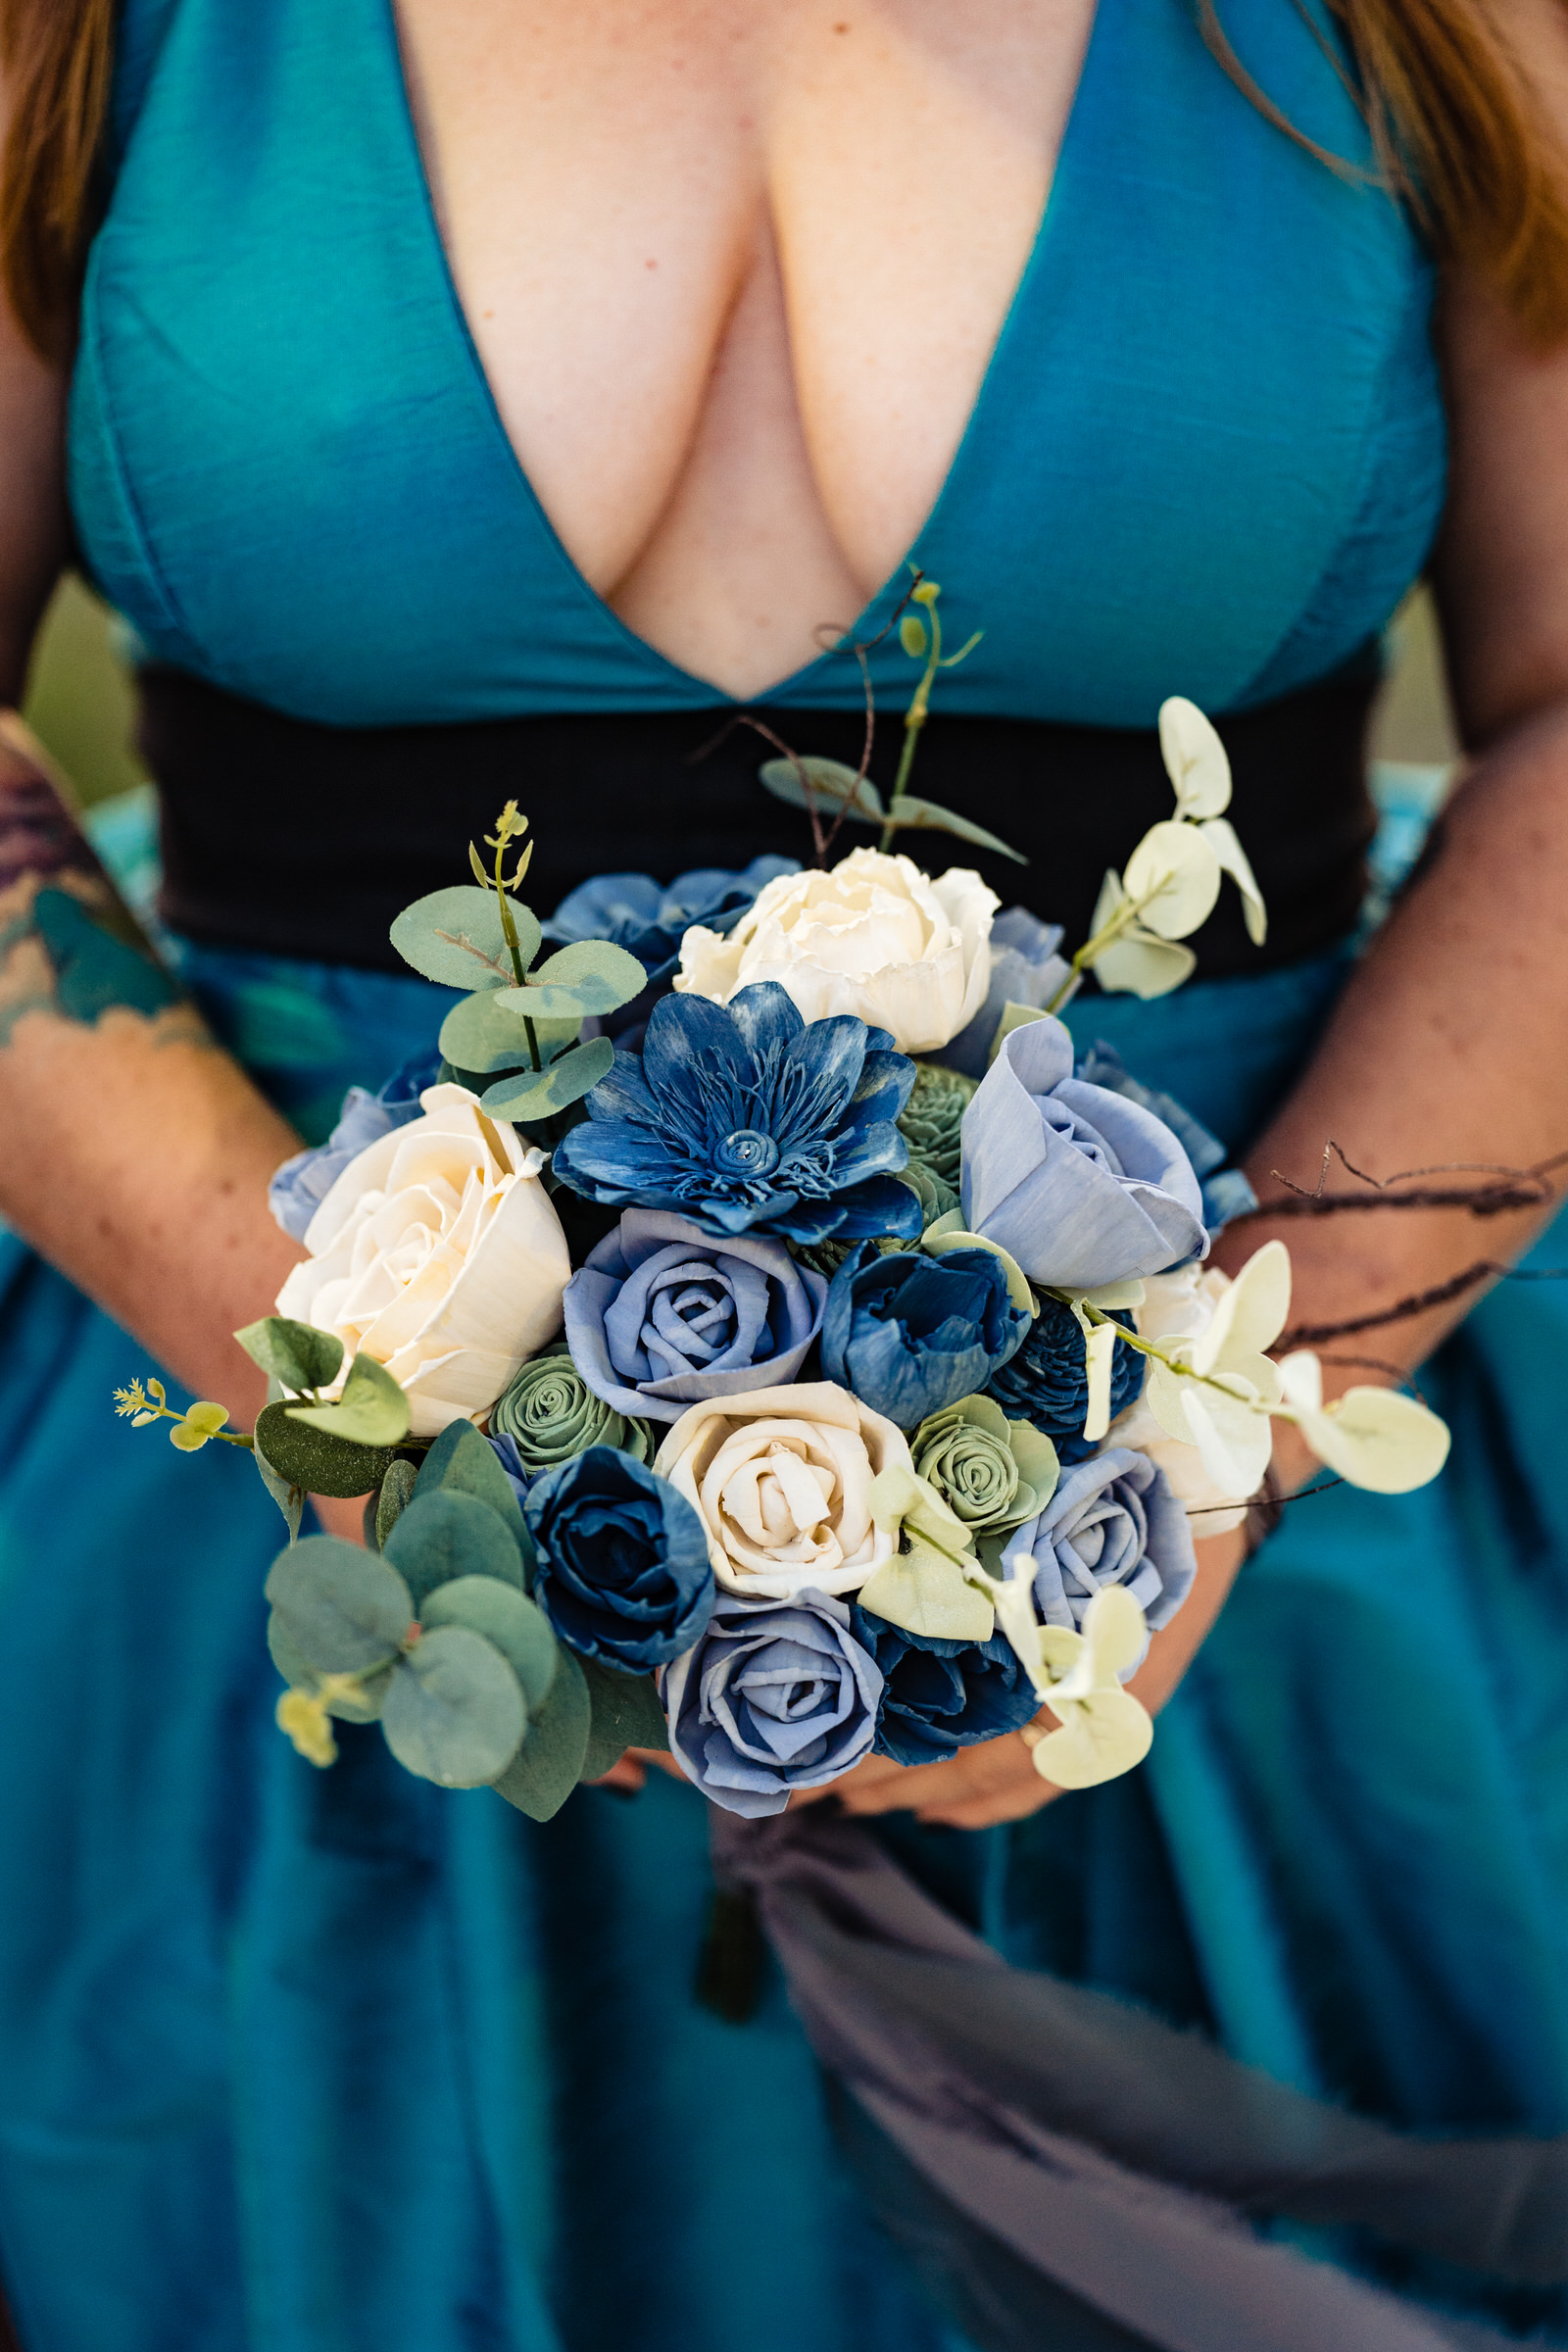 Closeup of a blue and white wood flower bouquet held by a woman in a teal dress